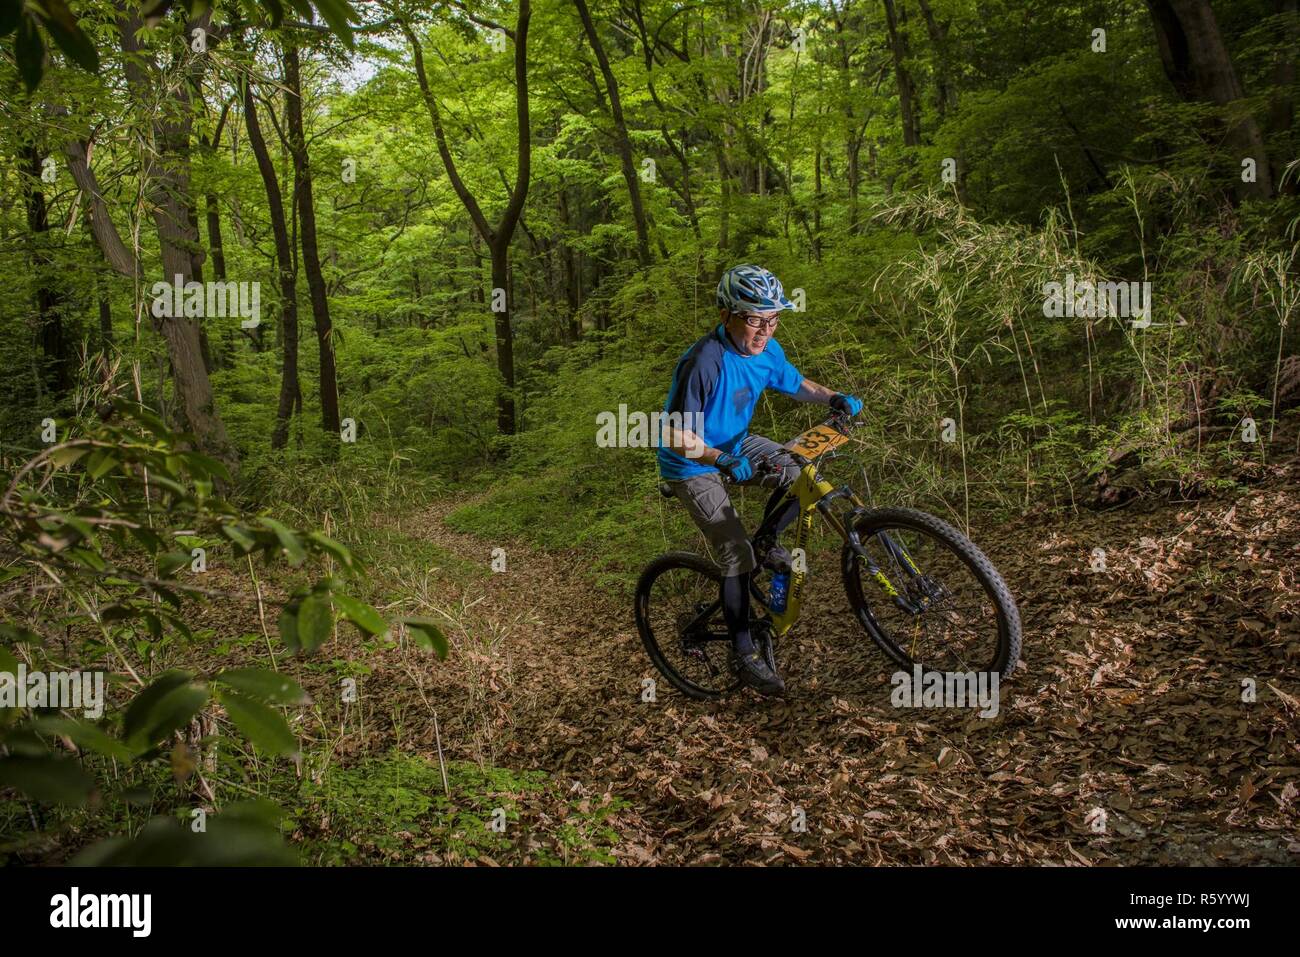 A participant in the Tour de Tama mountain bike race peddles uphill April 22, 2017, at Tama Hills Recreation Area, Japan. The course was approximately three miles in length and an approximate 3000 feet in combined elevation gain. Stock Photo